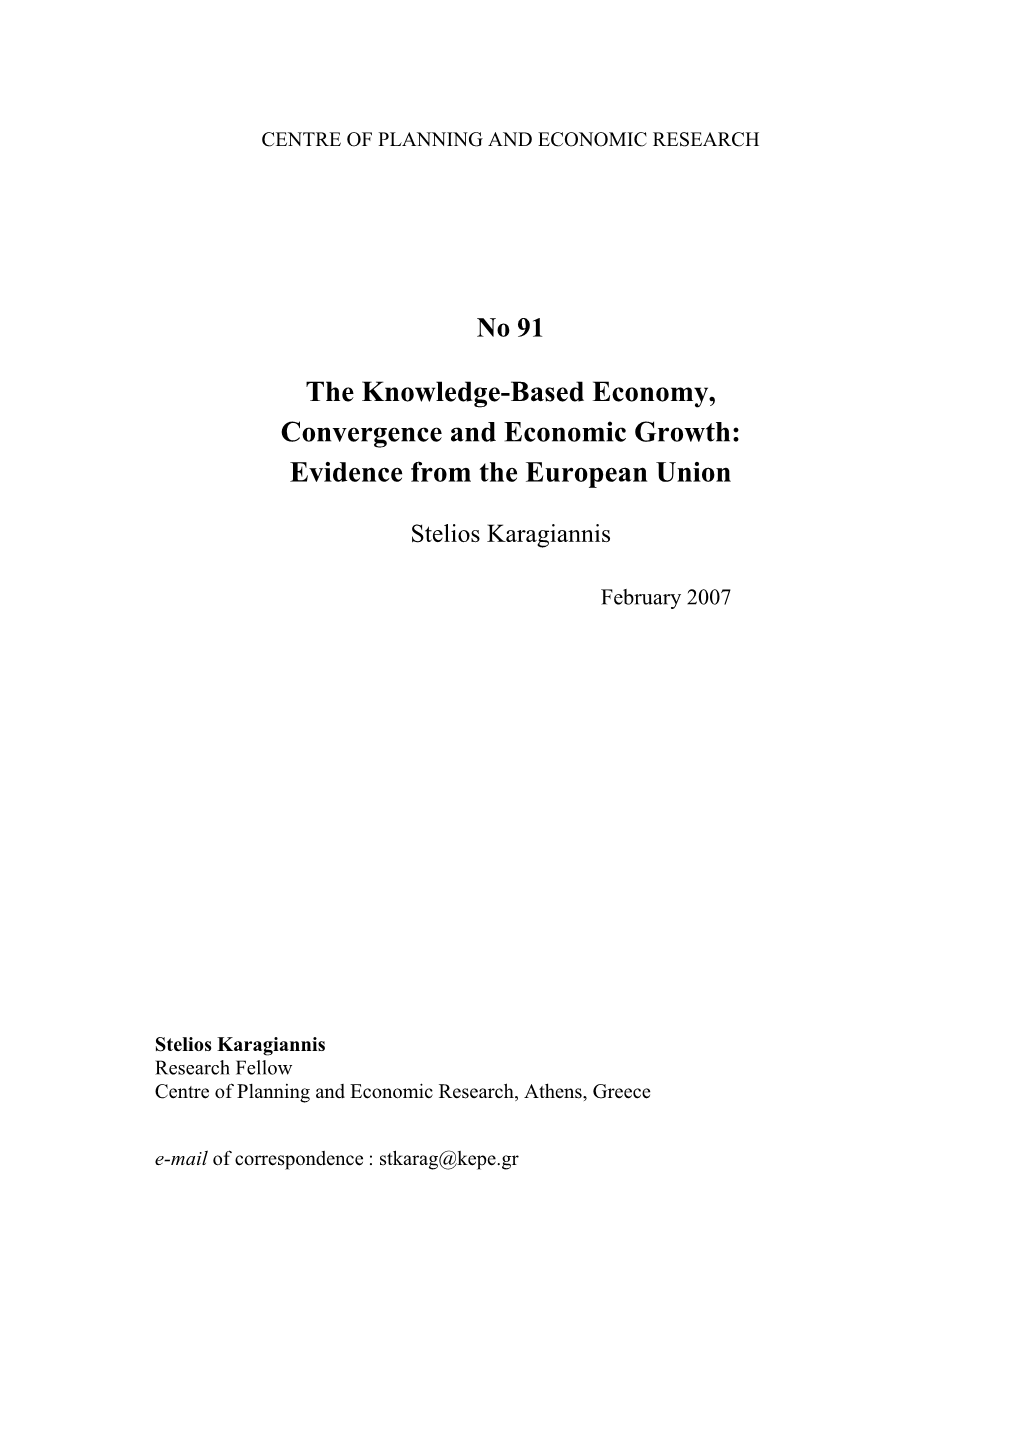 The Knowledge-Based Economy, Convergence and Economic Growth: Evidence from the European Union